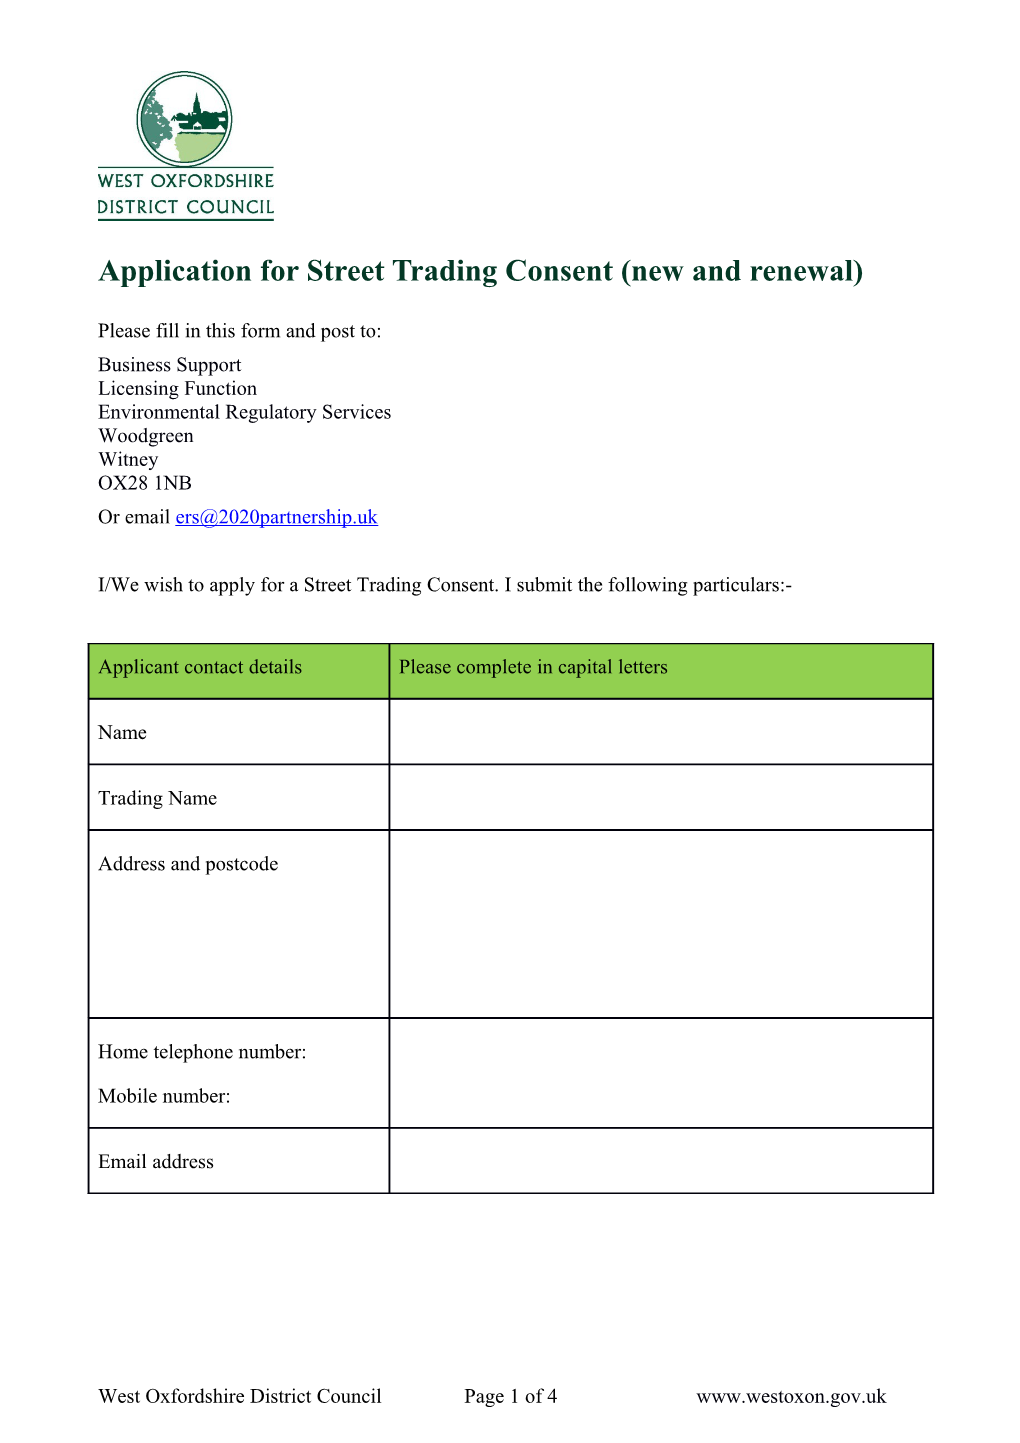 Application for Street Trading Consent (New and Renewal)